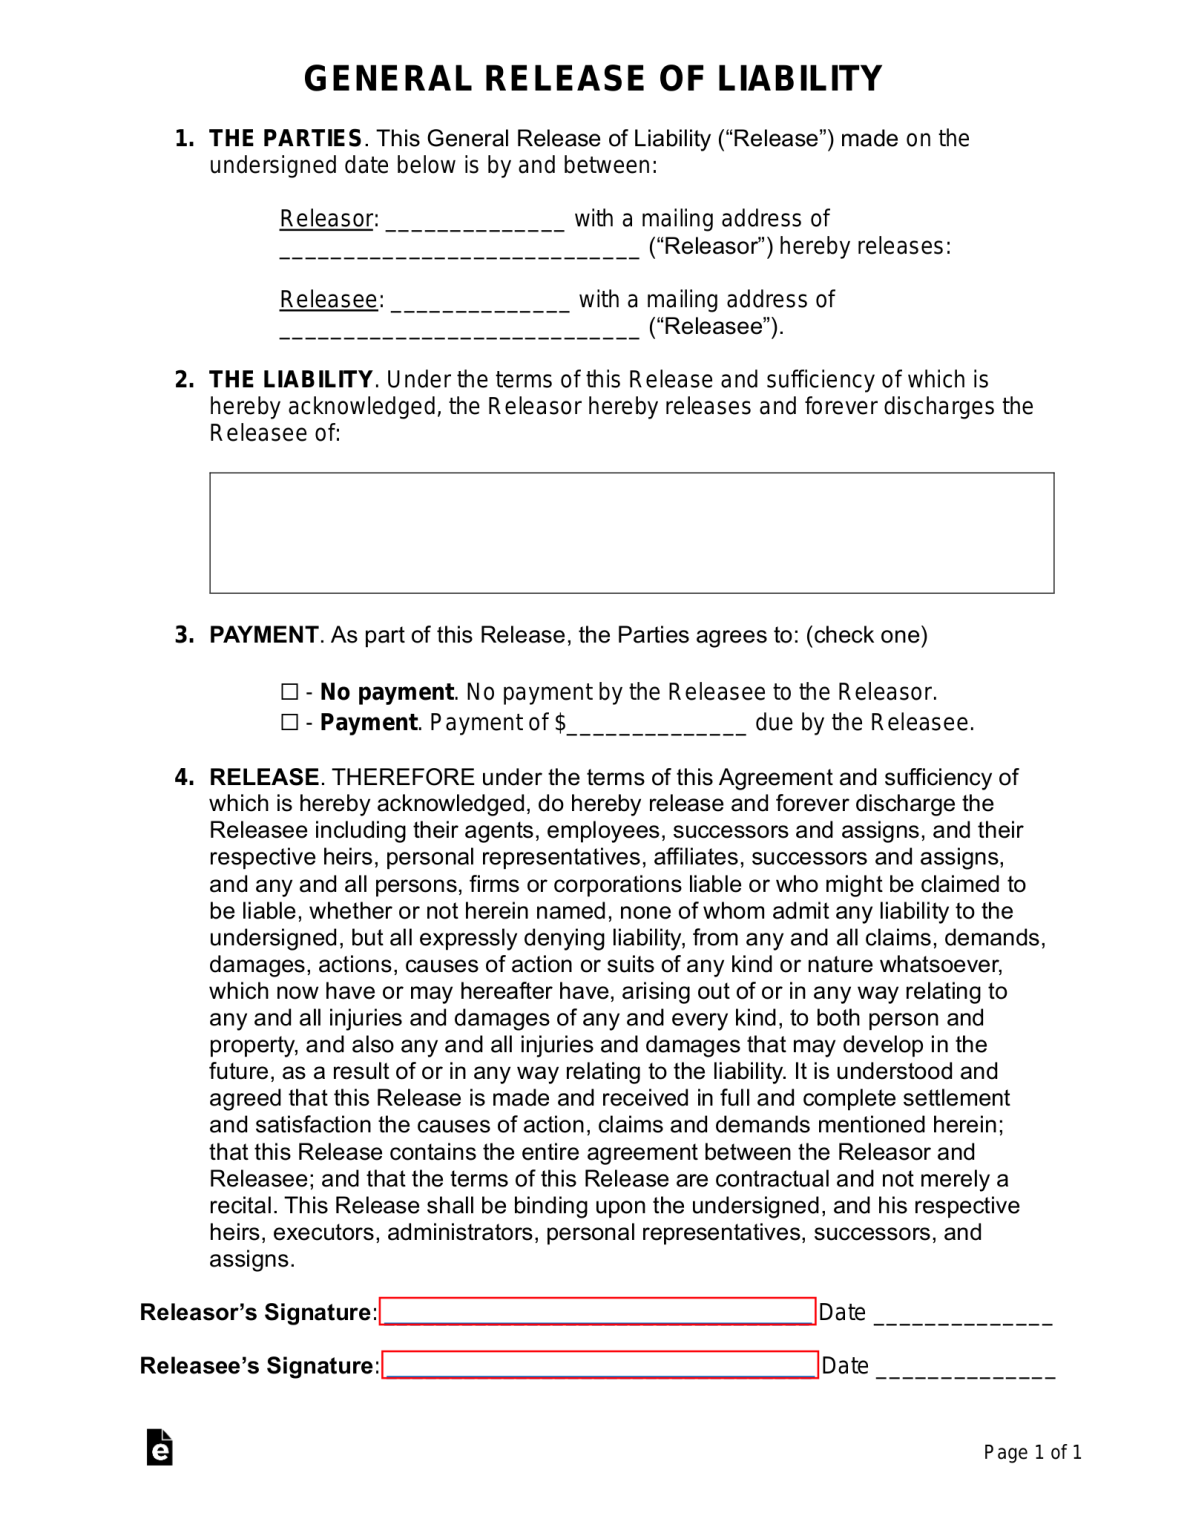 free-release-of-liability-waiver-forms-12-pdf-word-eforms